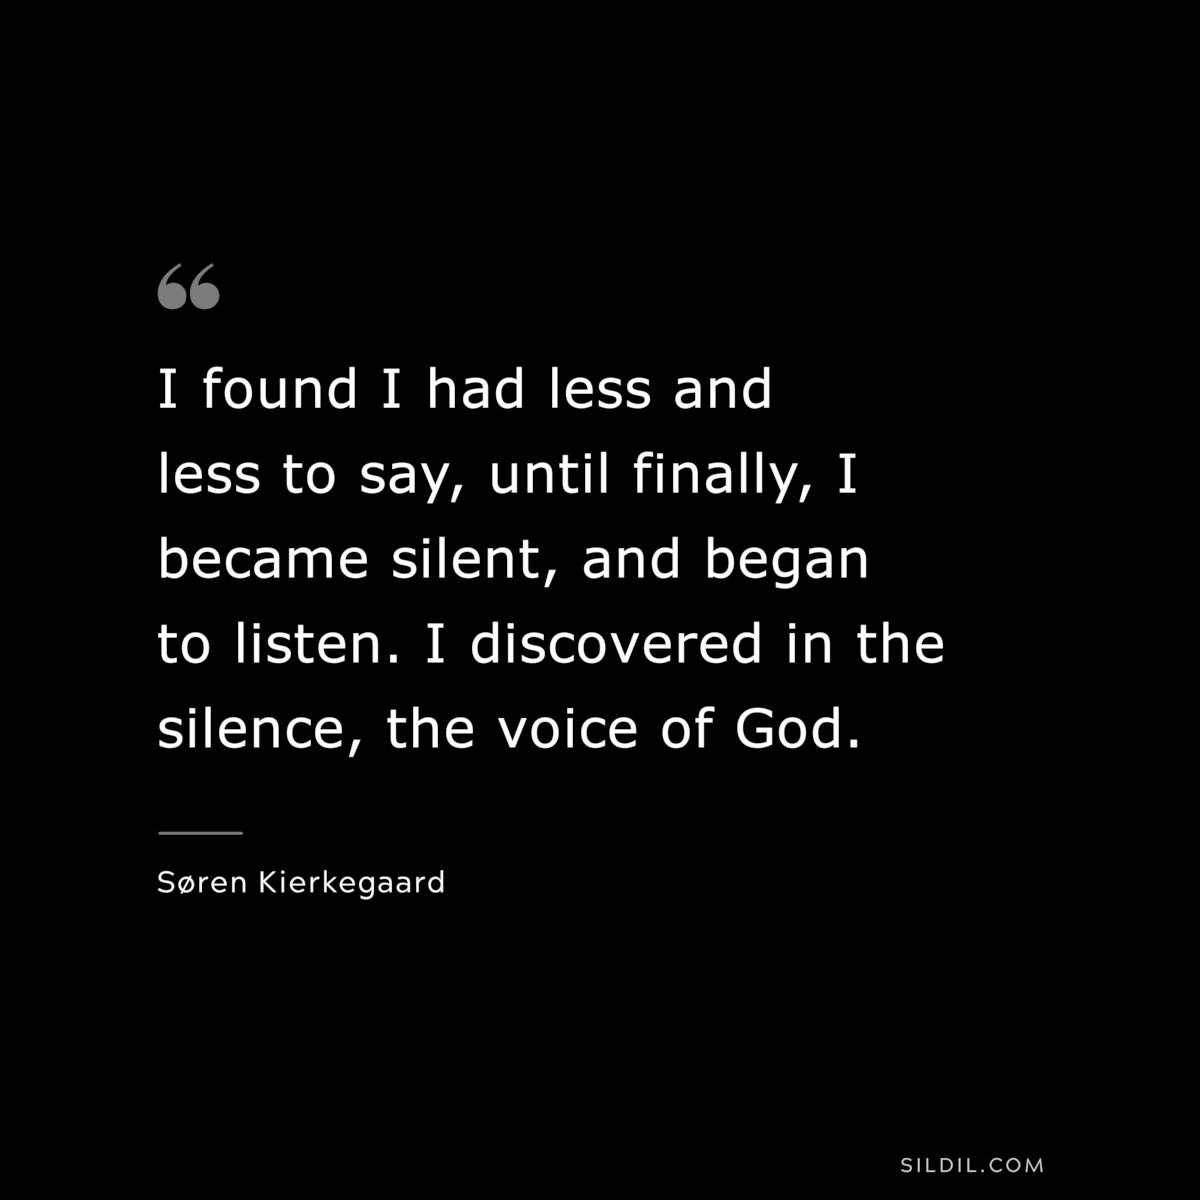 I found I had less and less to say, until finally, I became silent, and began to listen. I discovered in the silence, the voice of God. ― Søren Kierkegaard